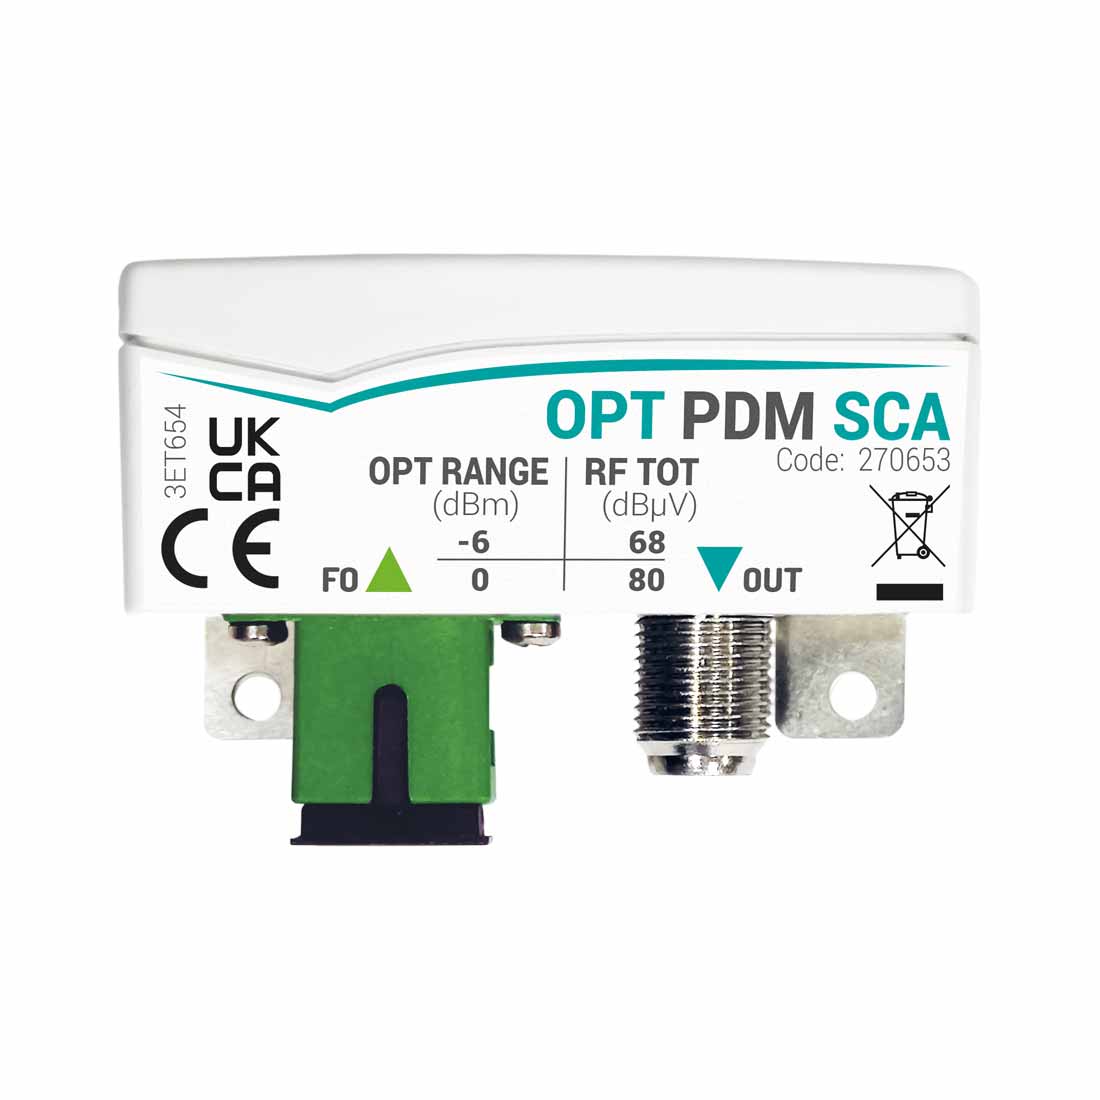 OPT-PDM-SCA